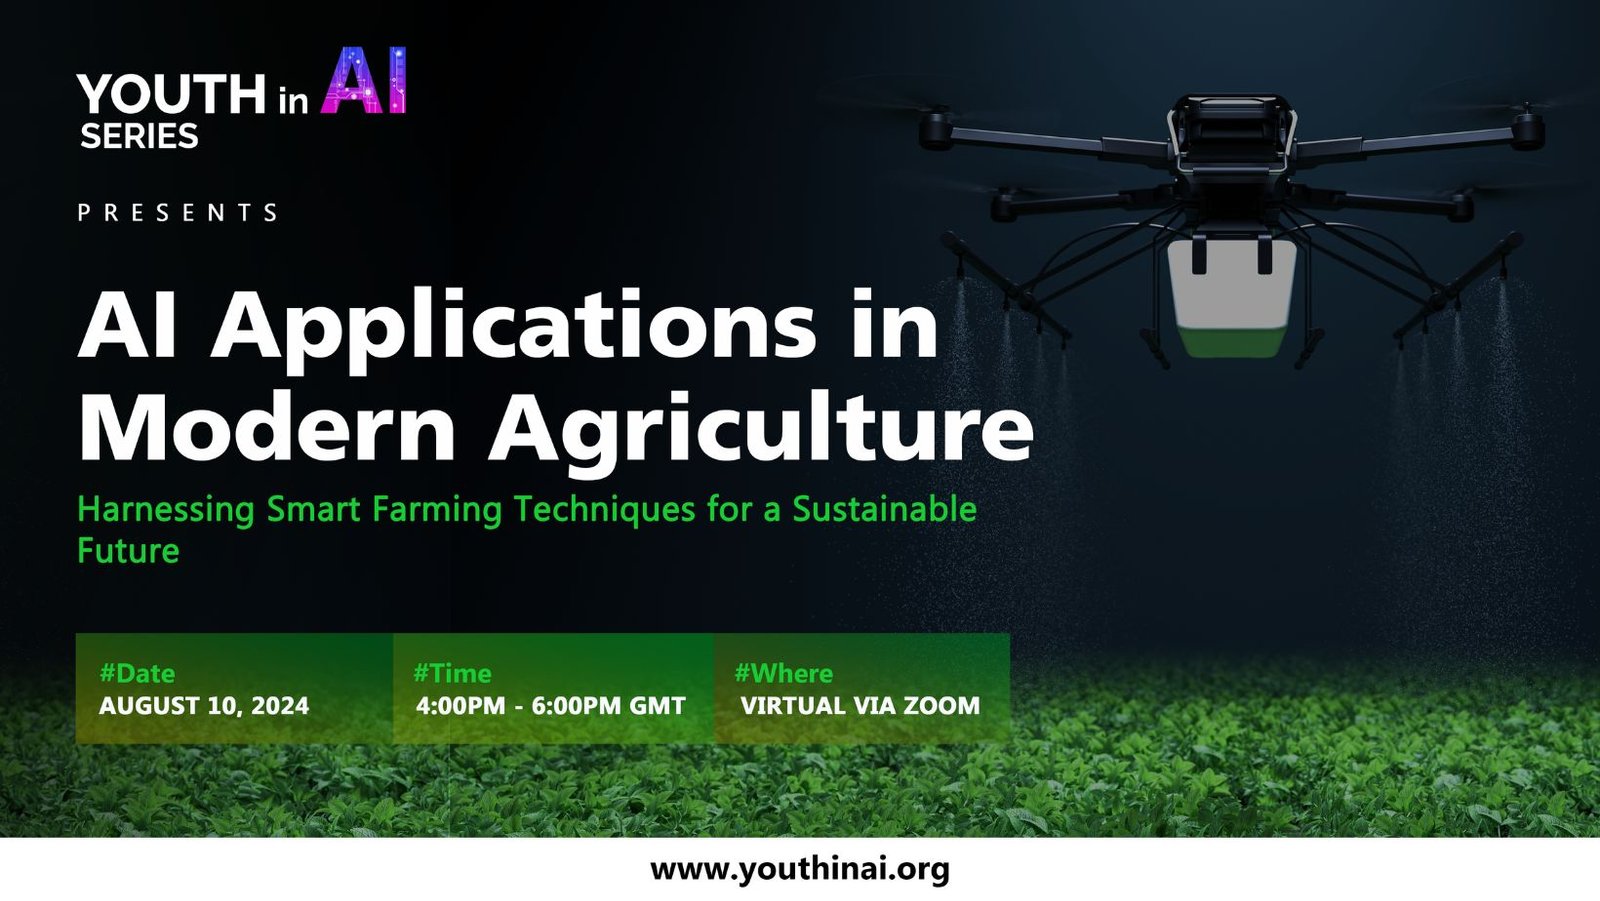 PRESS RELEASE: AI Applications in Modern Agriculture: Harnessing Smart Farming Techniques for a Sustainable Future – Youth in AI Series